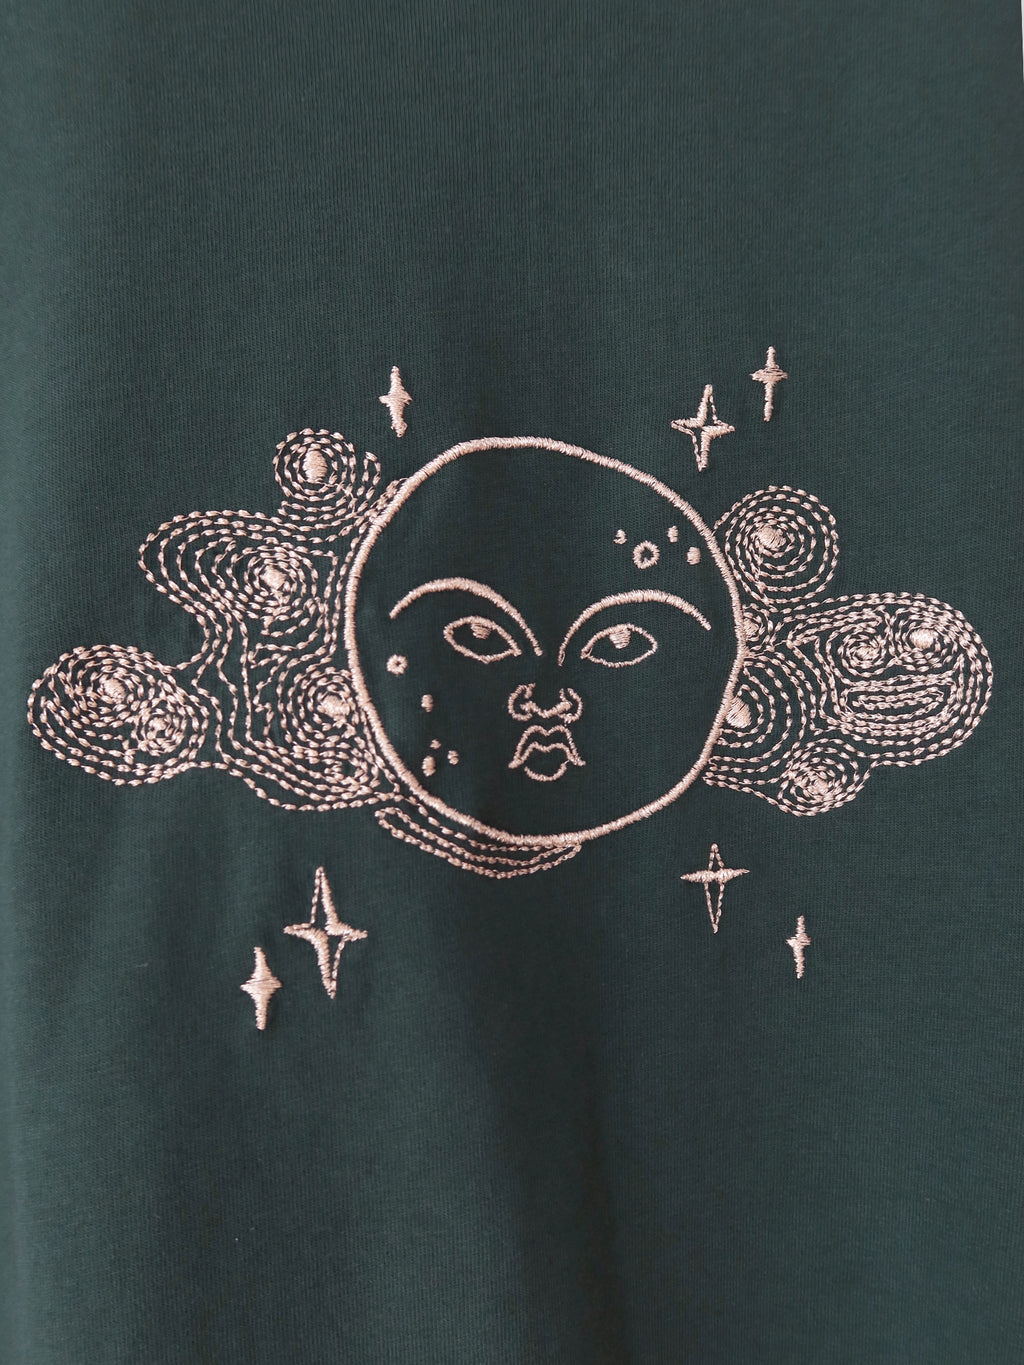 LO x Laura Callaghan Starry Sky T-Shirt